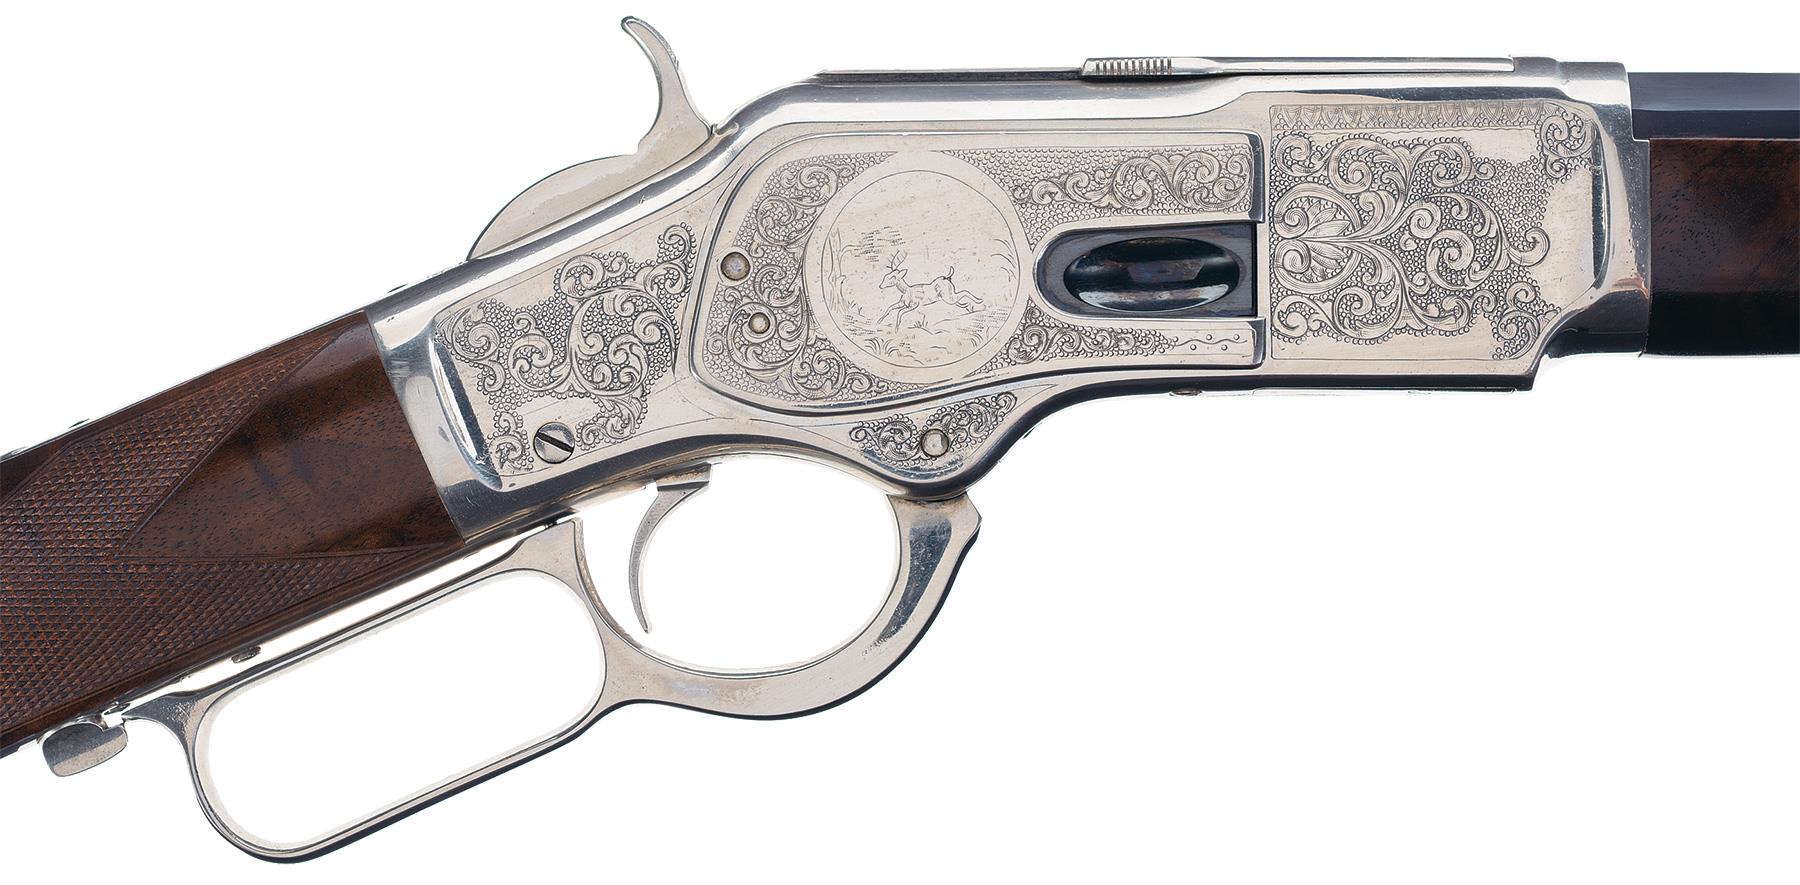 RIAC Heats Up the Summer with Over $7 Million in June Gun Auction